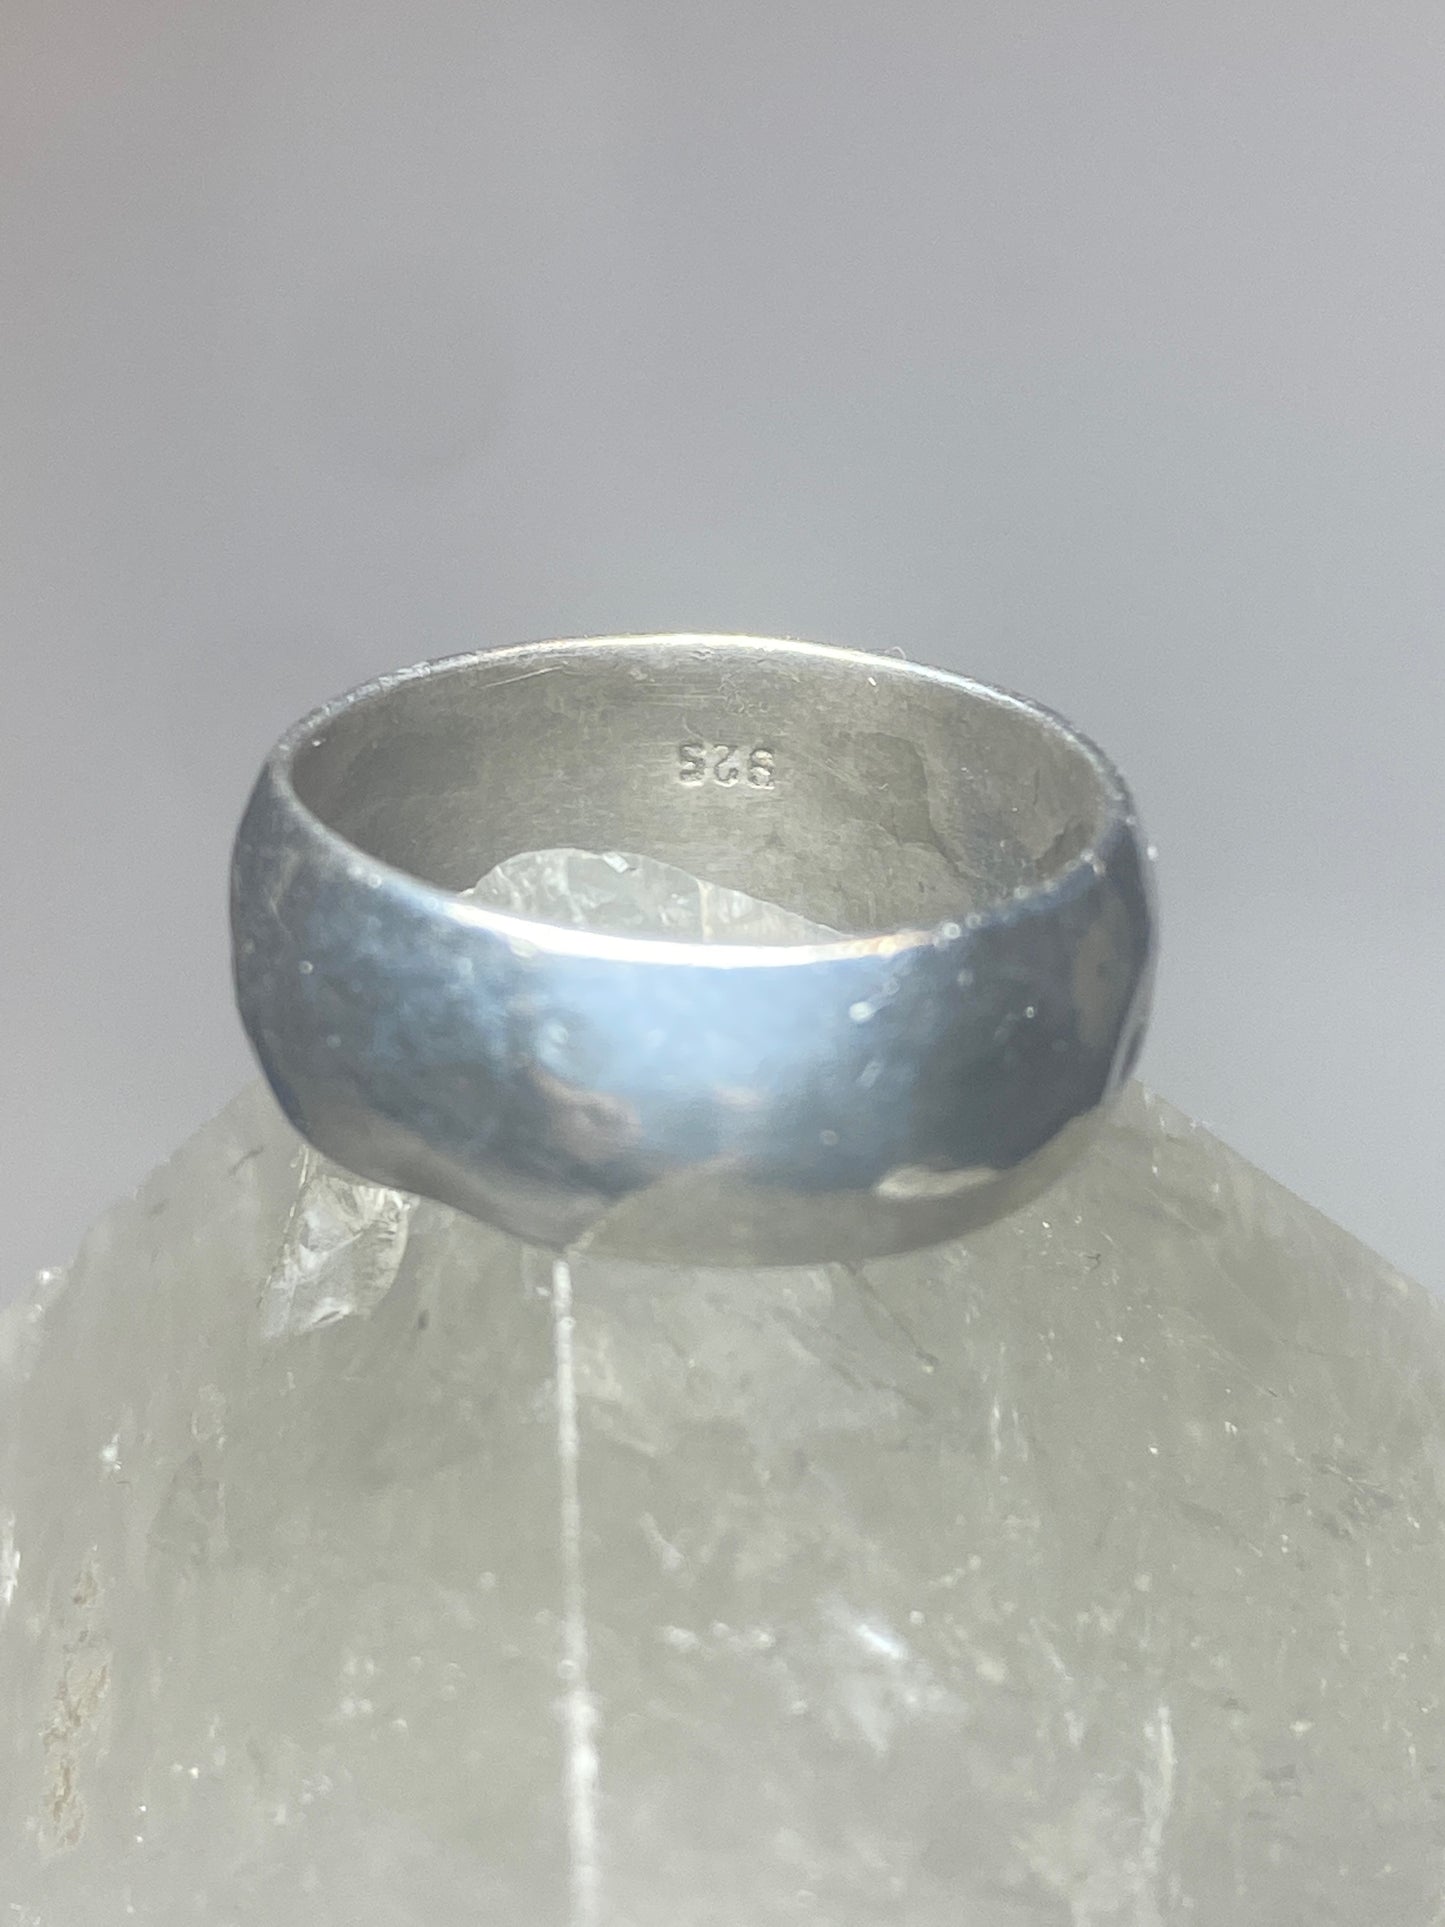 Plain ring wedding band size  6  pinky sterling silver  S